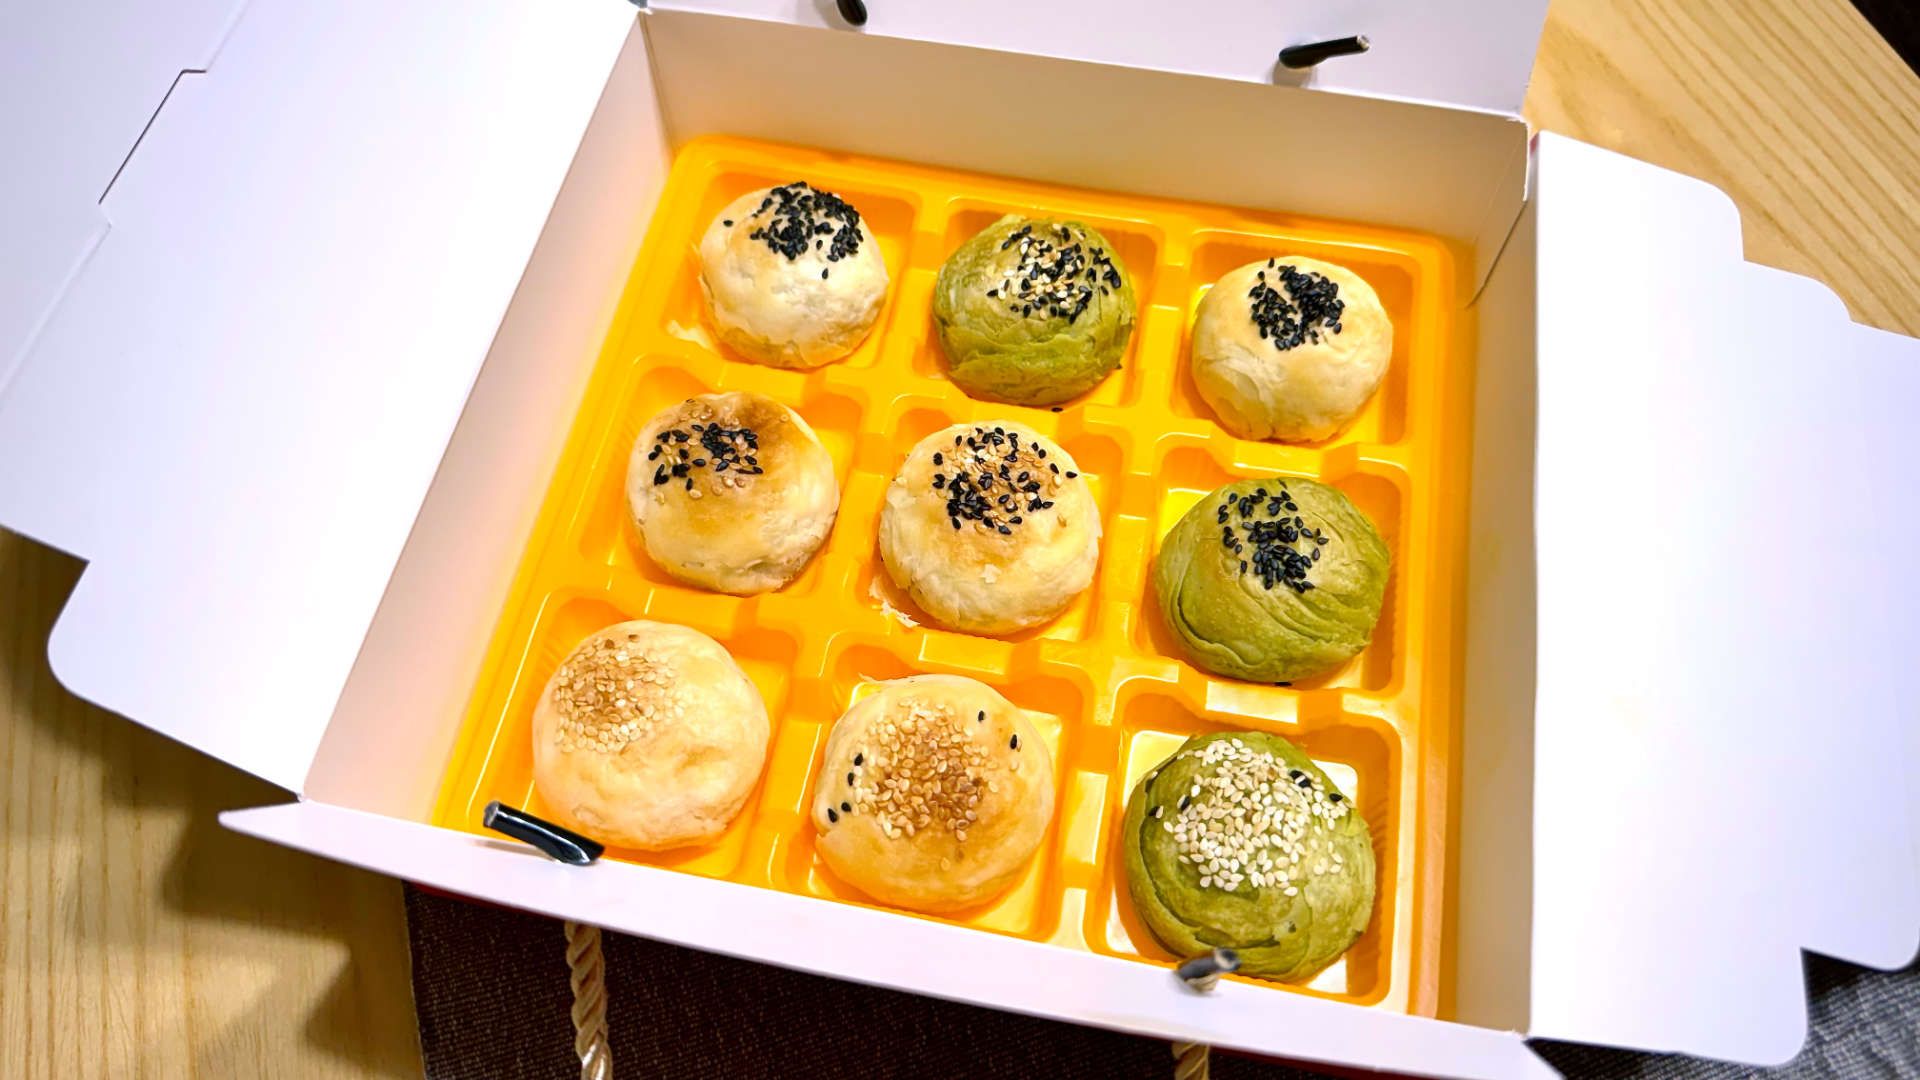 An open cardboard box. Inside is a plastic tray covered in nine round mooncakes. The mooncakes are either green or pastry-colored, and topped with small seeds.